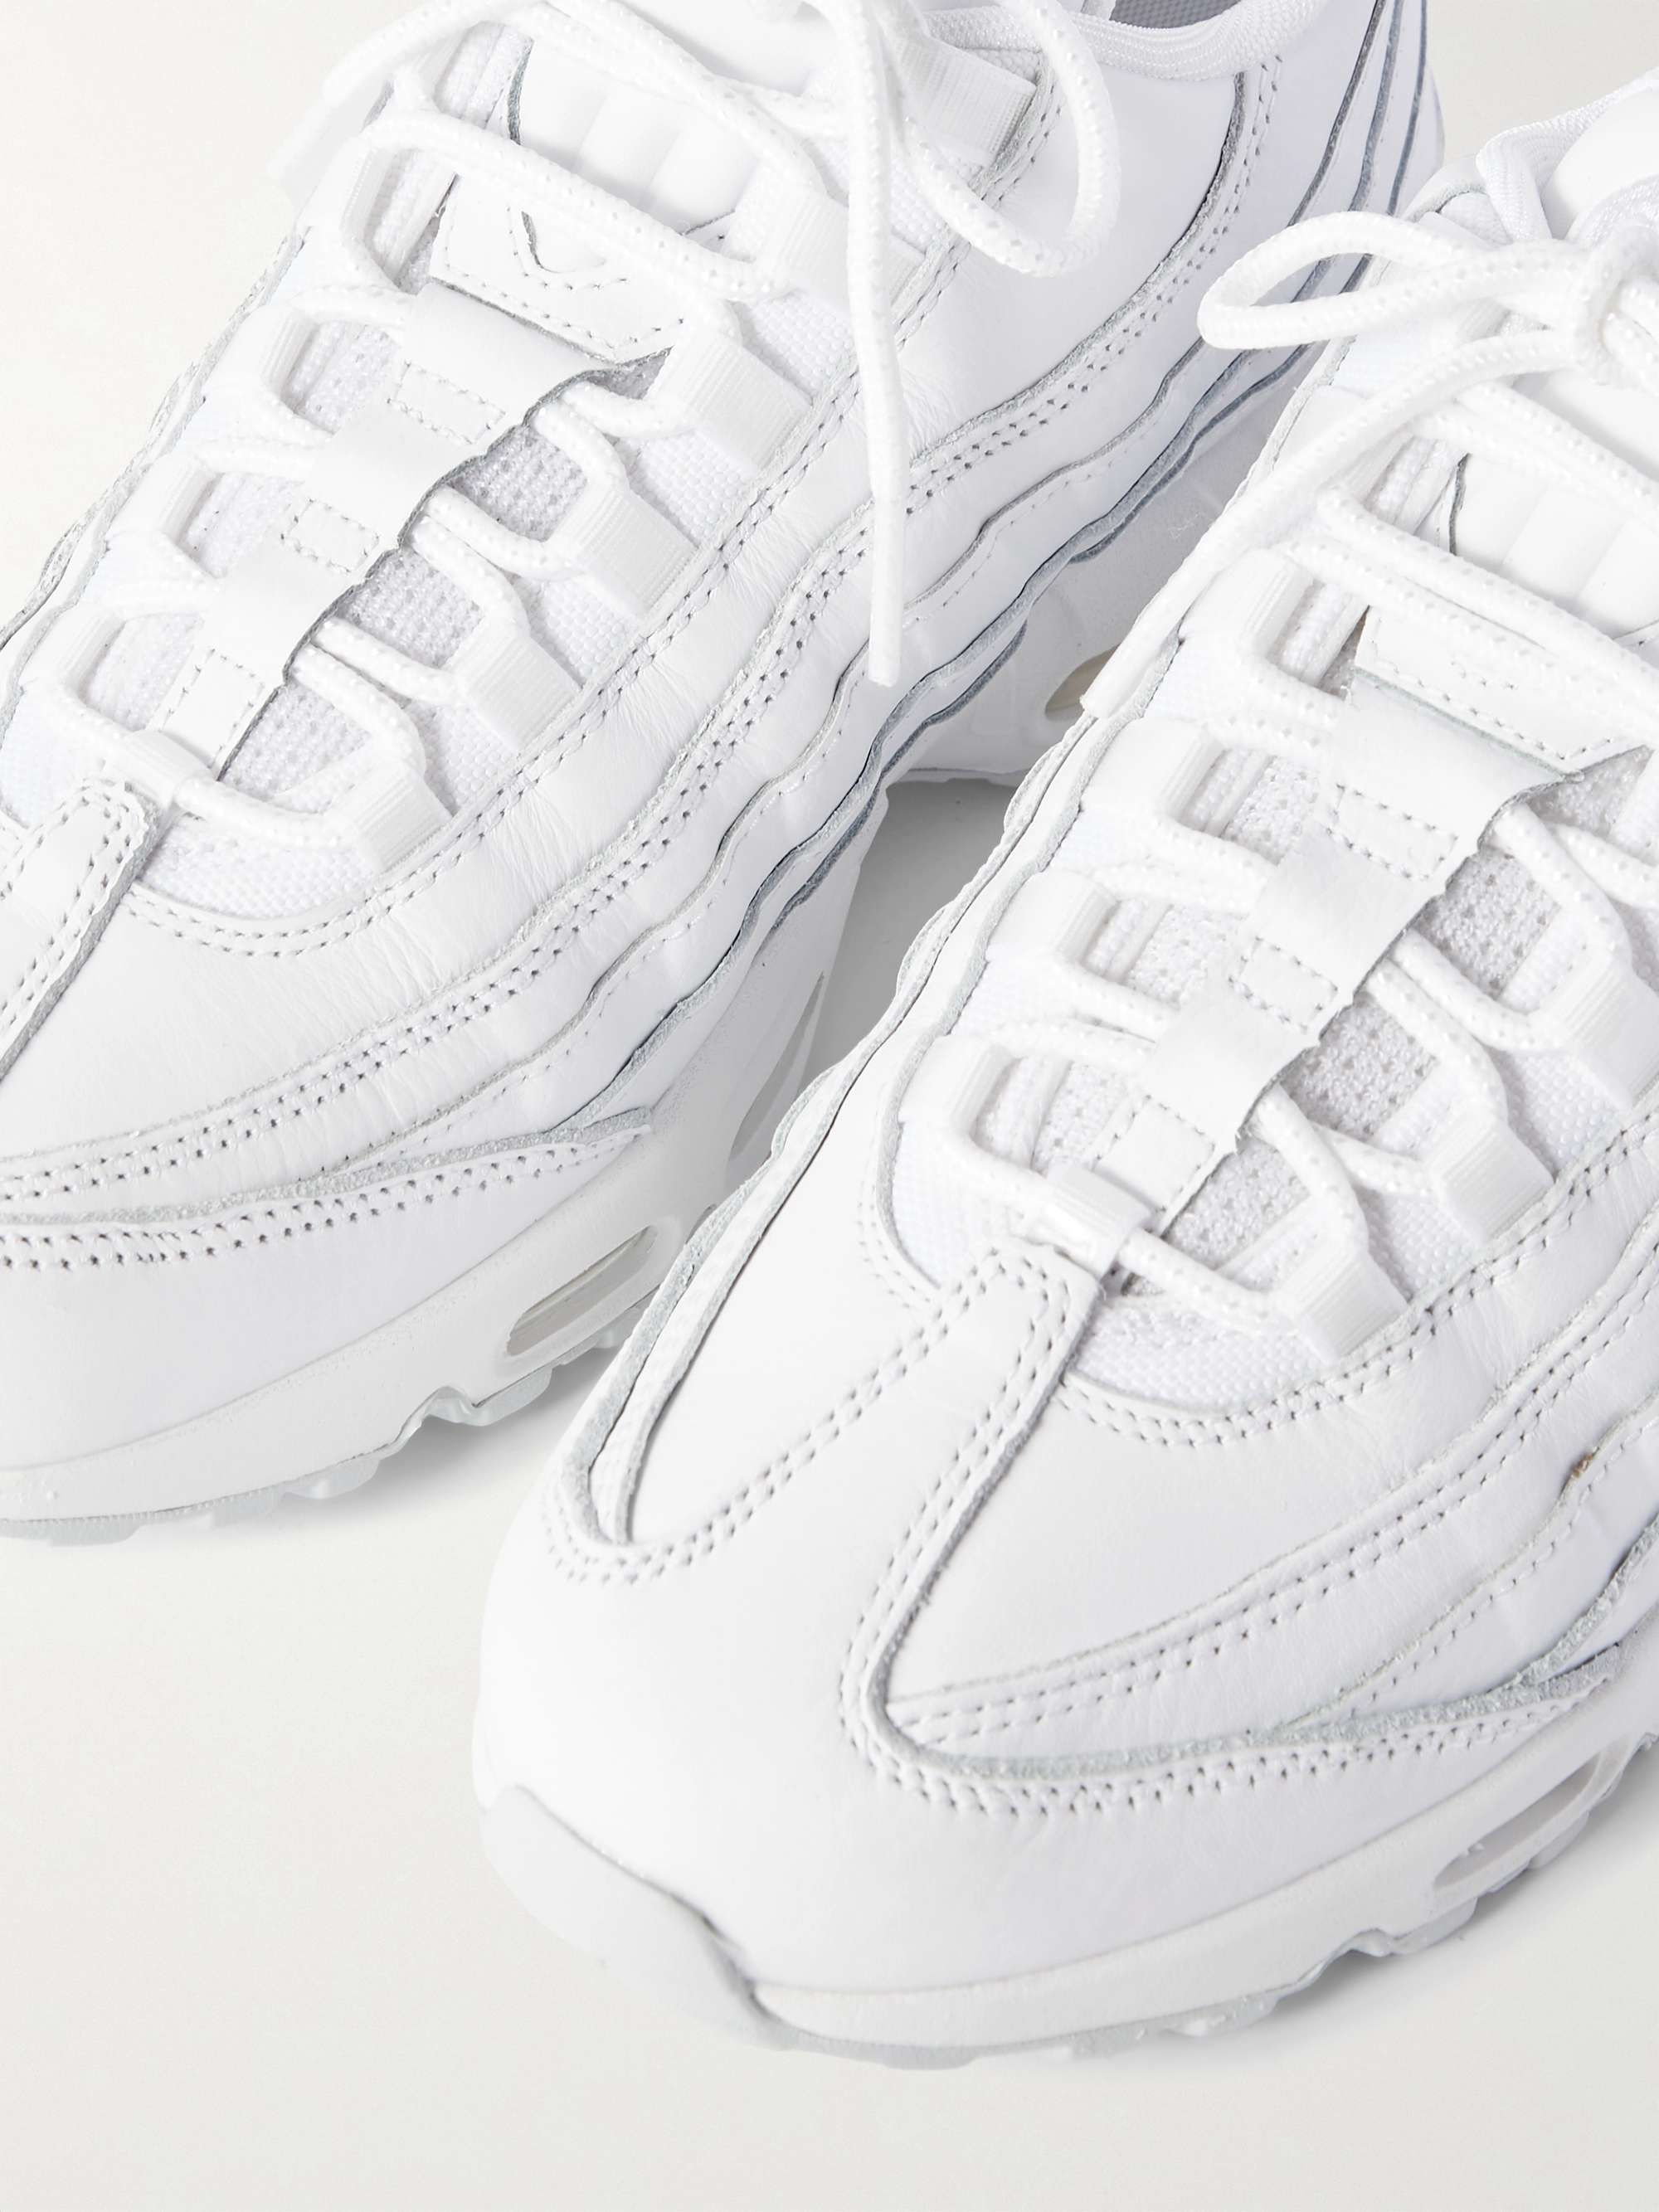 NIKE Air Max 95 Leather Sneakers | MR PORTER